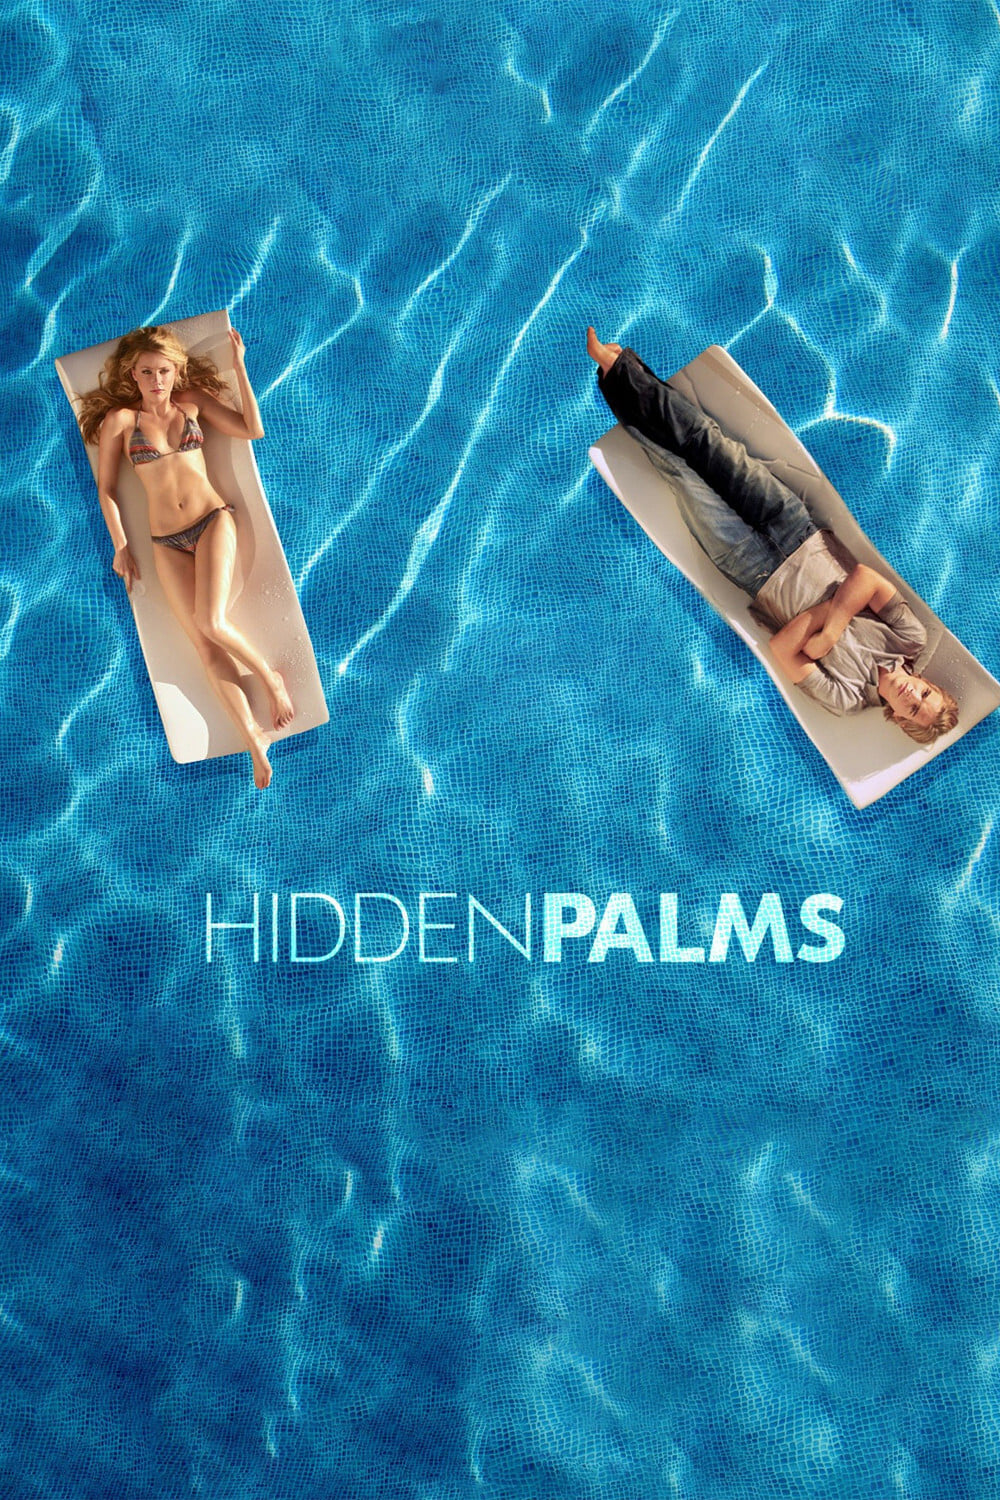 Hidden Palms TV Shows About Wealthy